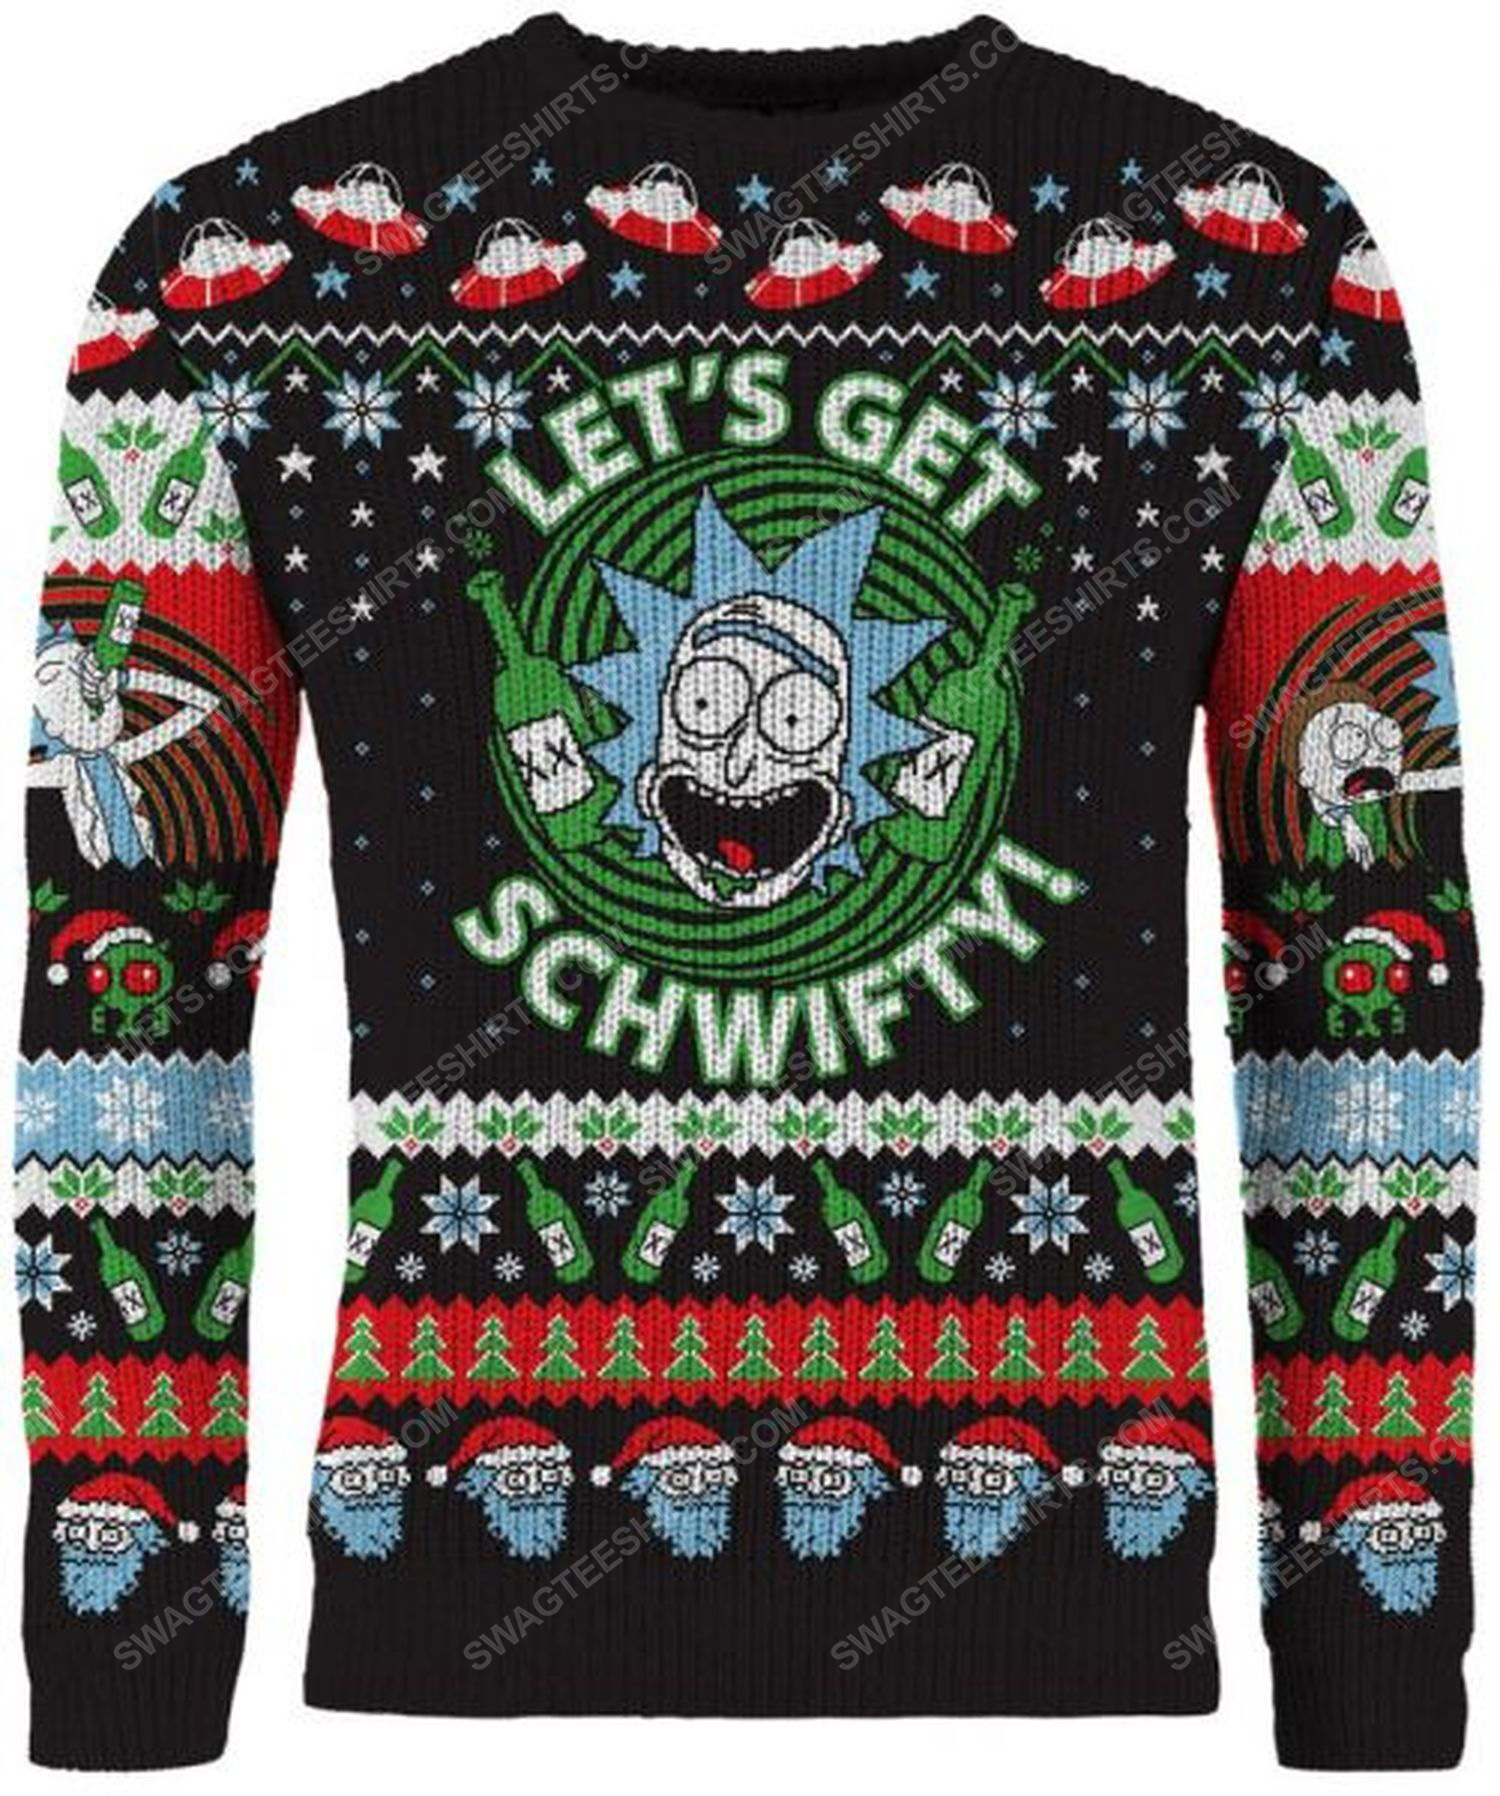 Rick and morty let's get schwifty full print ugly christmas sweater 1